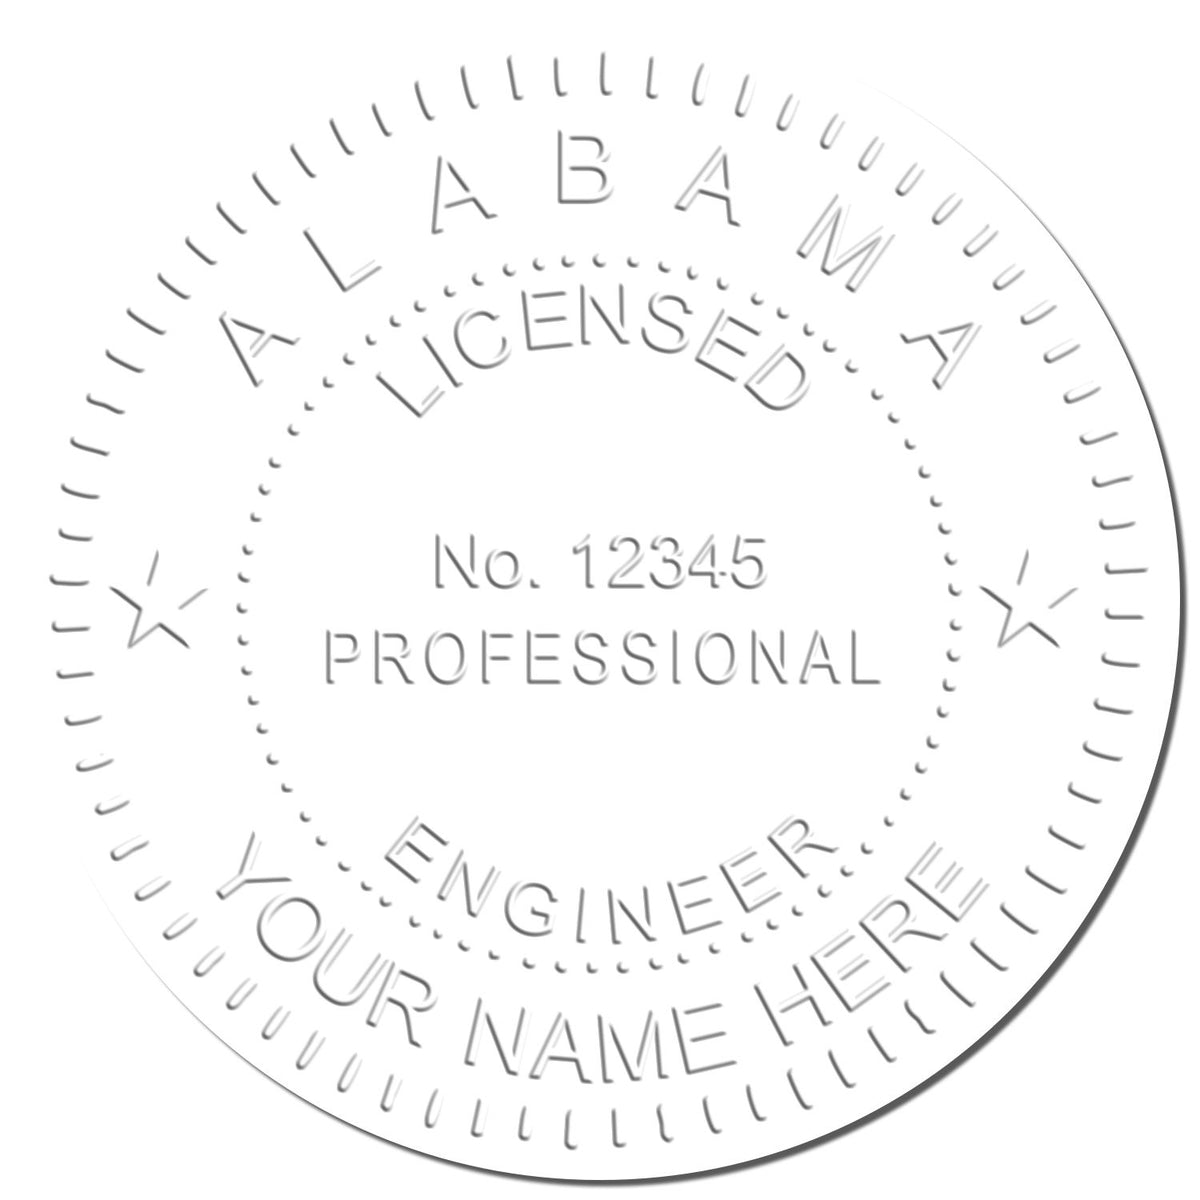 This paper is stamped with a sample imprint of the Hybrid Alabama Engineer Seal, signifying its quality and reliability.